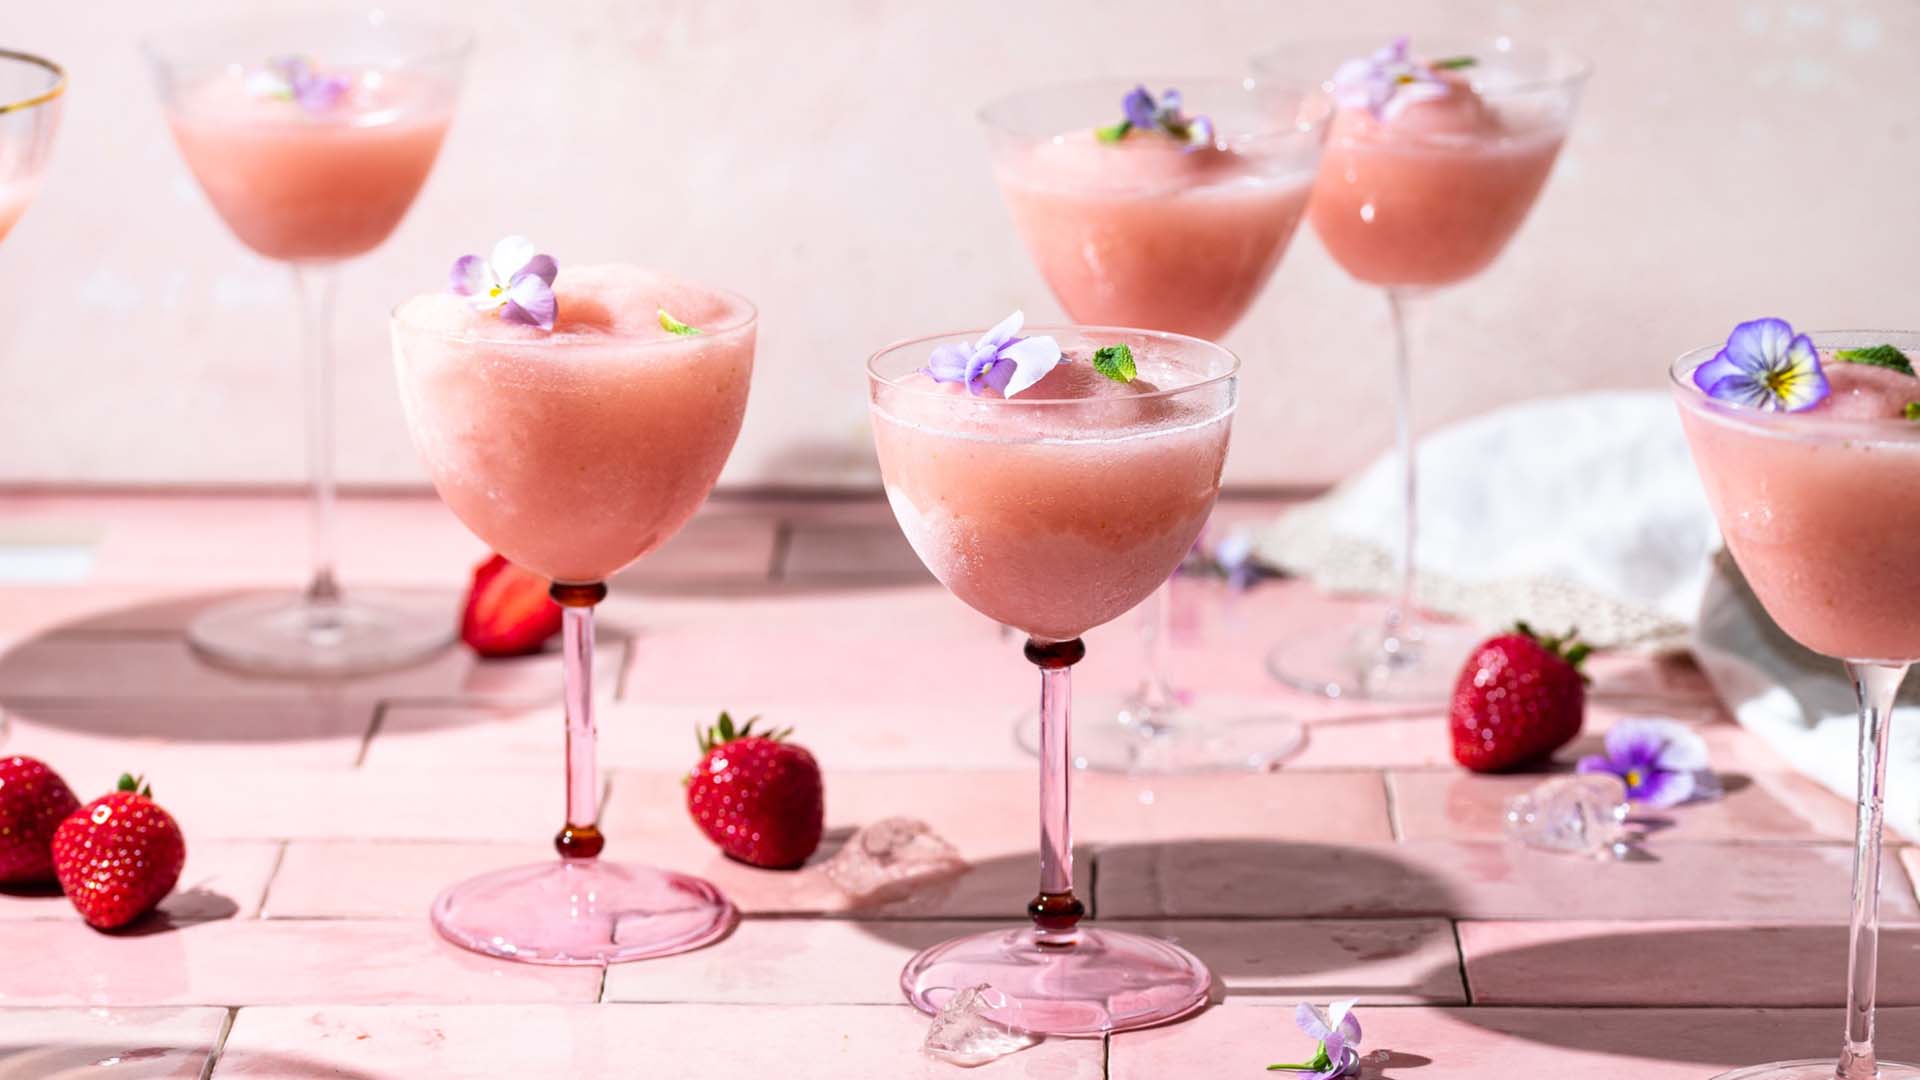 Glasses of strawberry and rose frose